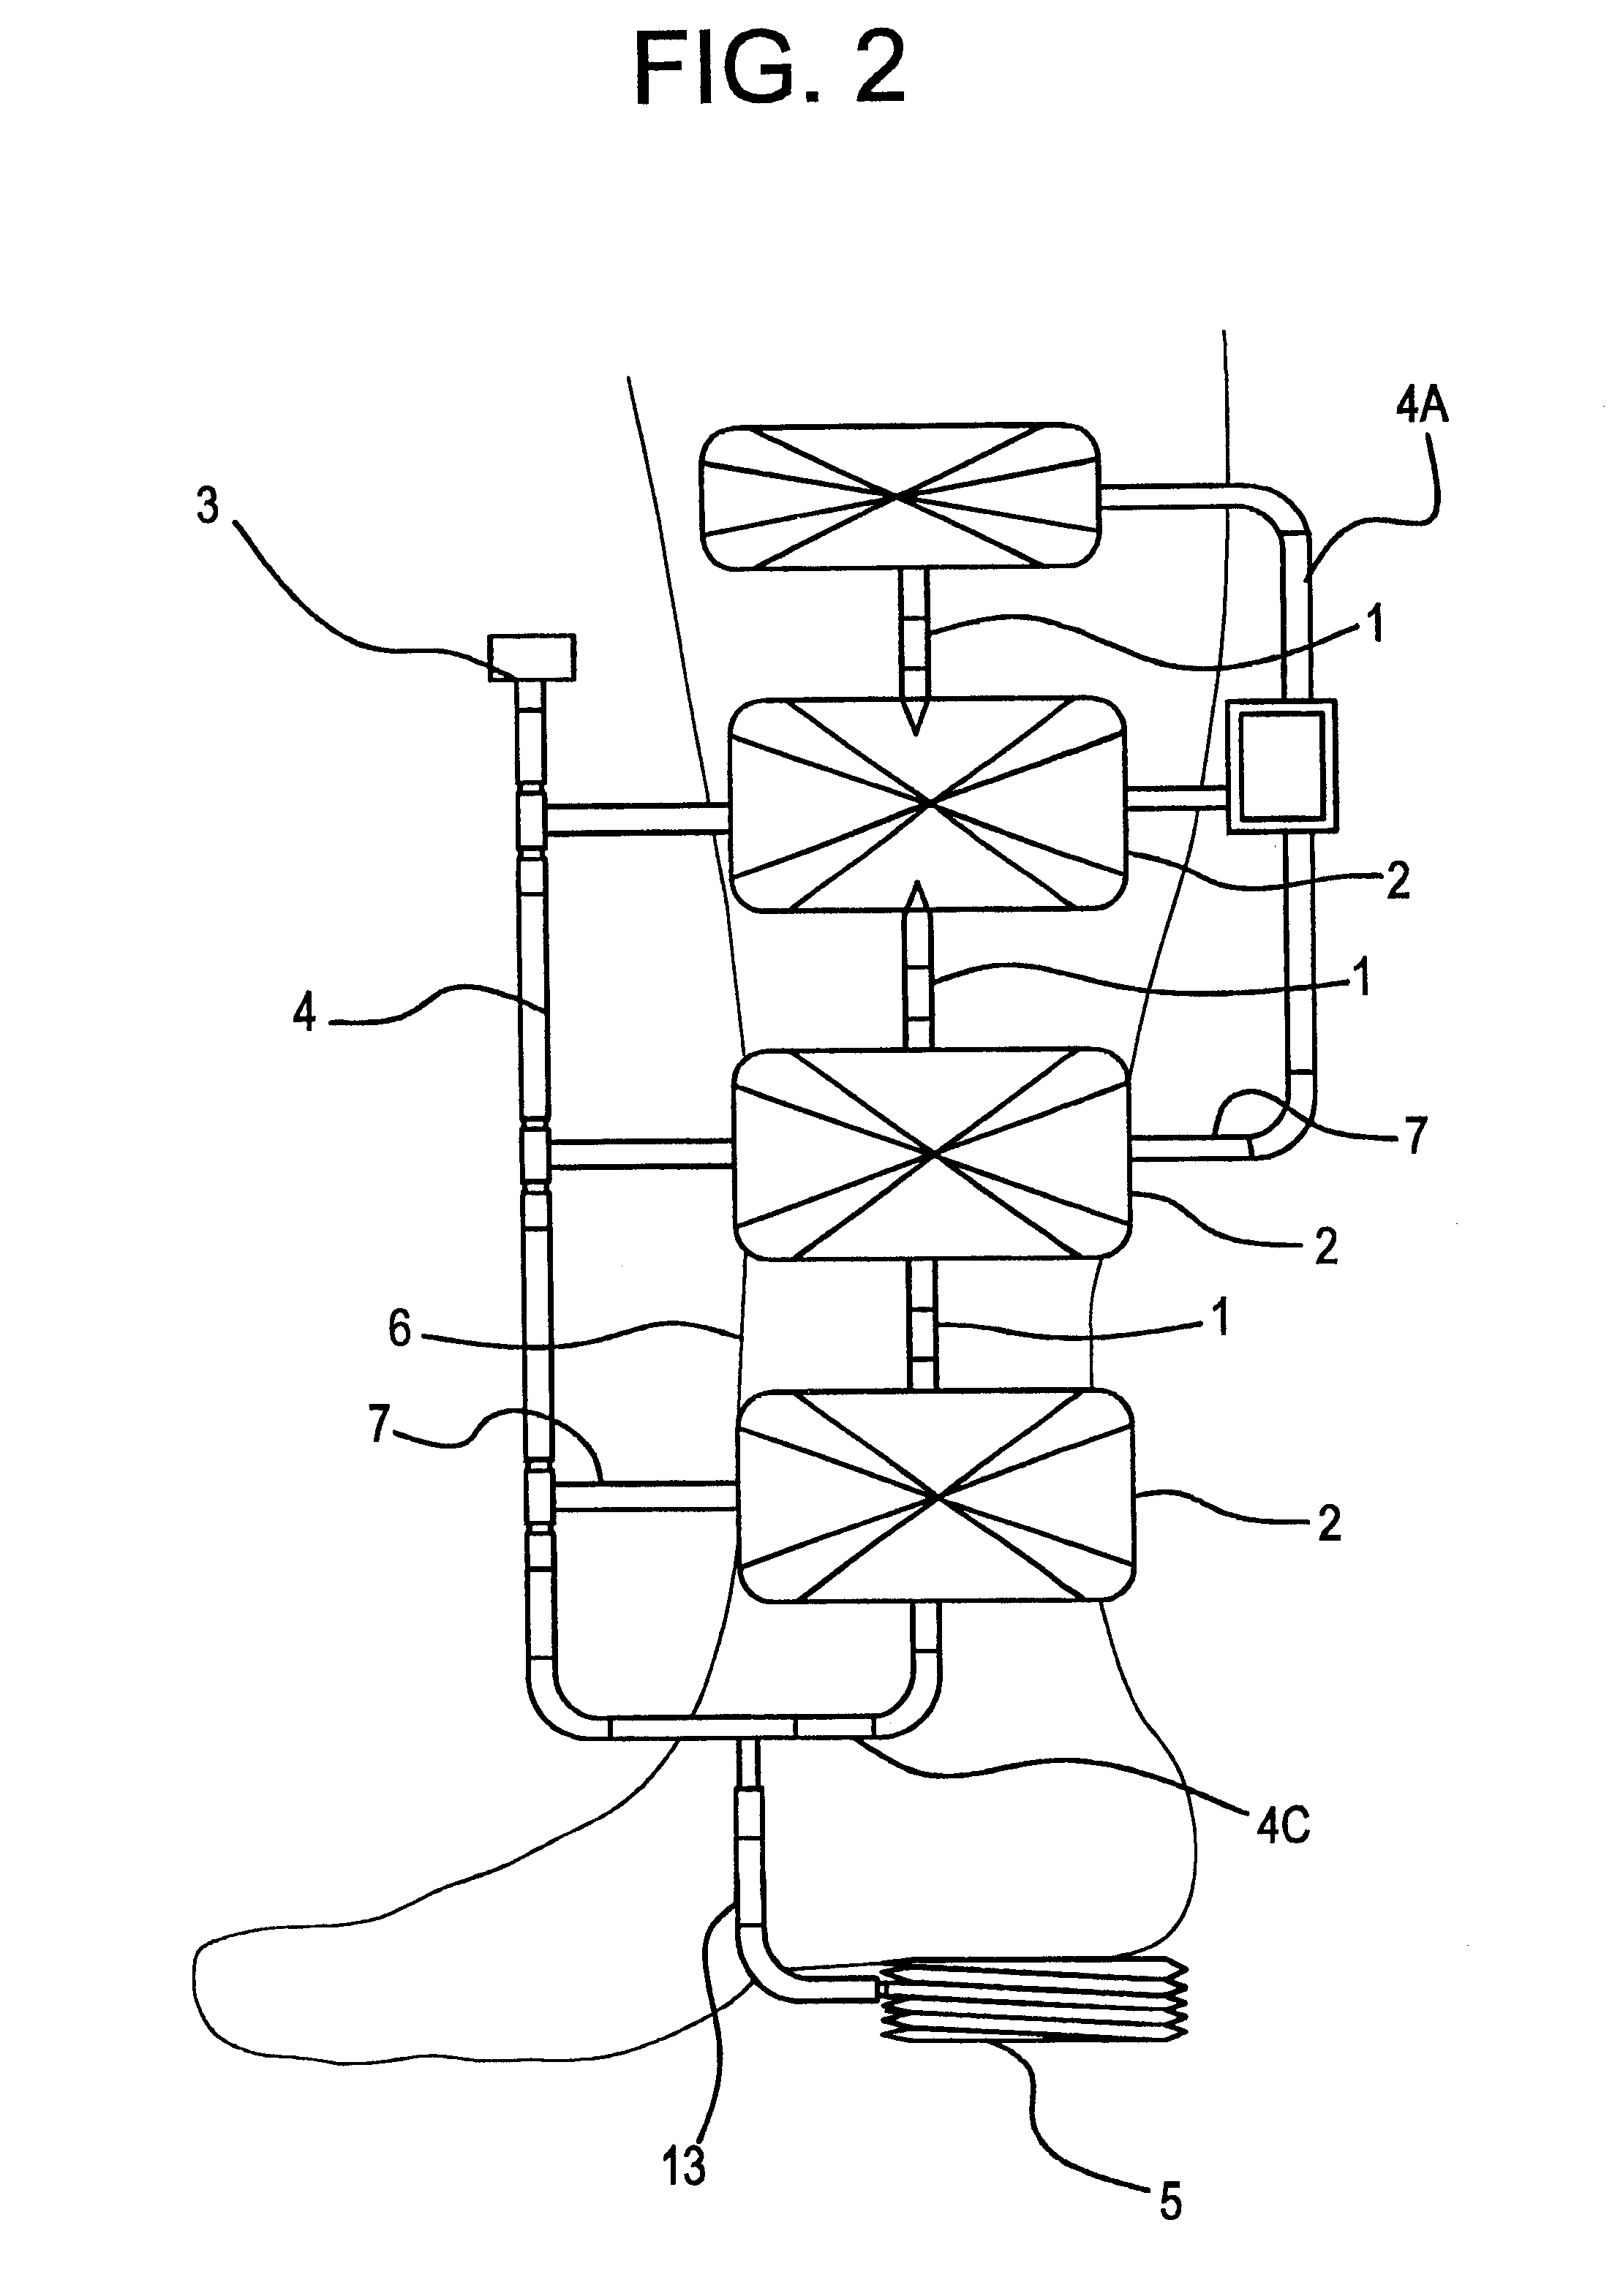 Self-powered compression devices and methods for promoting circulation and therapeutic compression